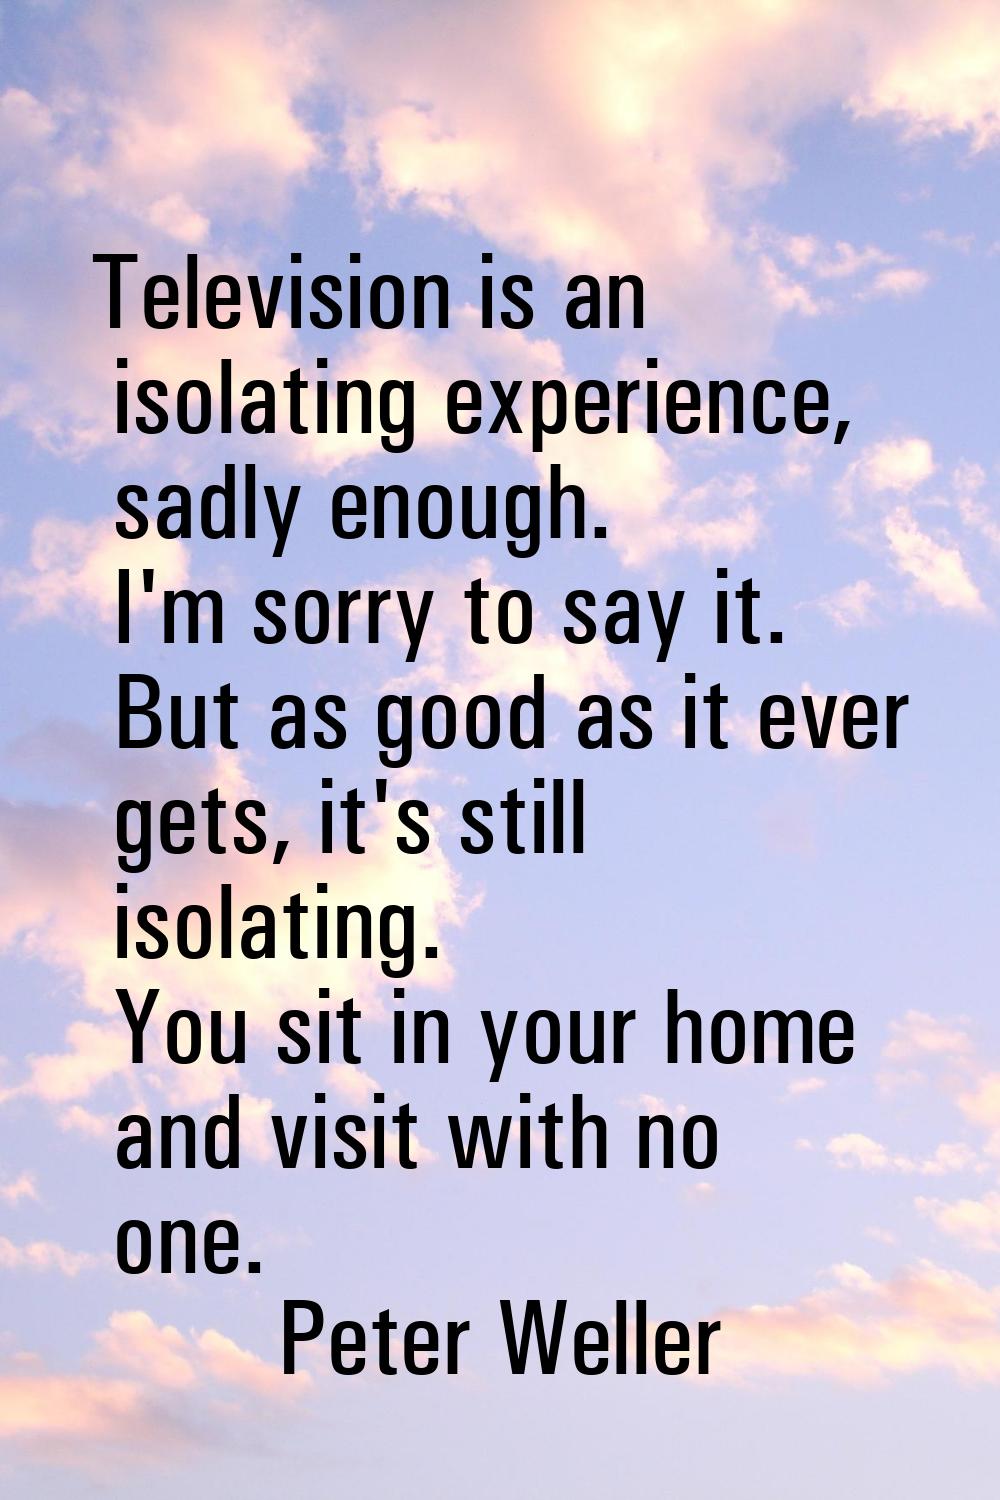 Television is an isolating experience, sadly enough. I'm sorry to say it. But as good as it ever ge